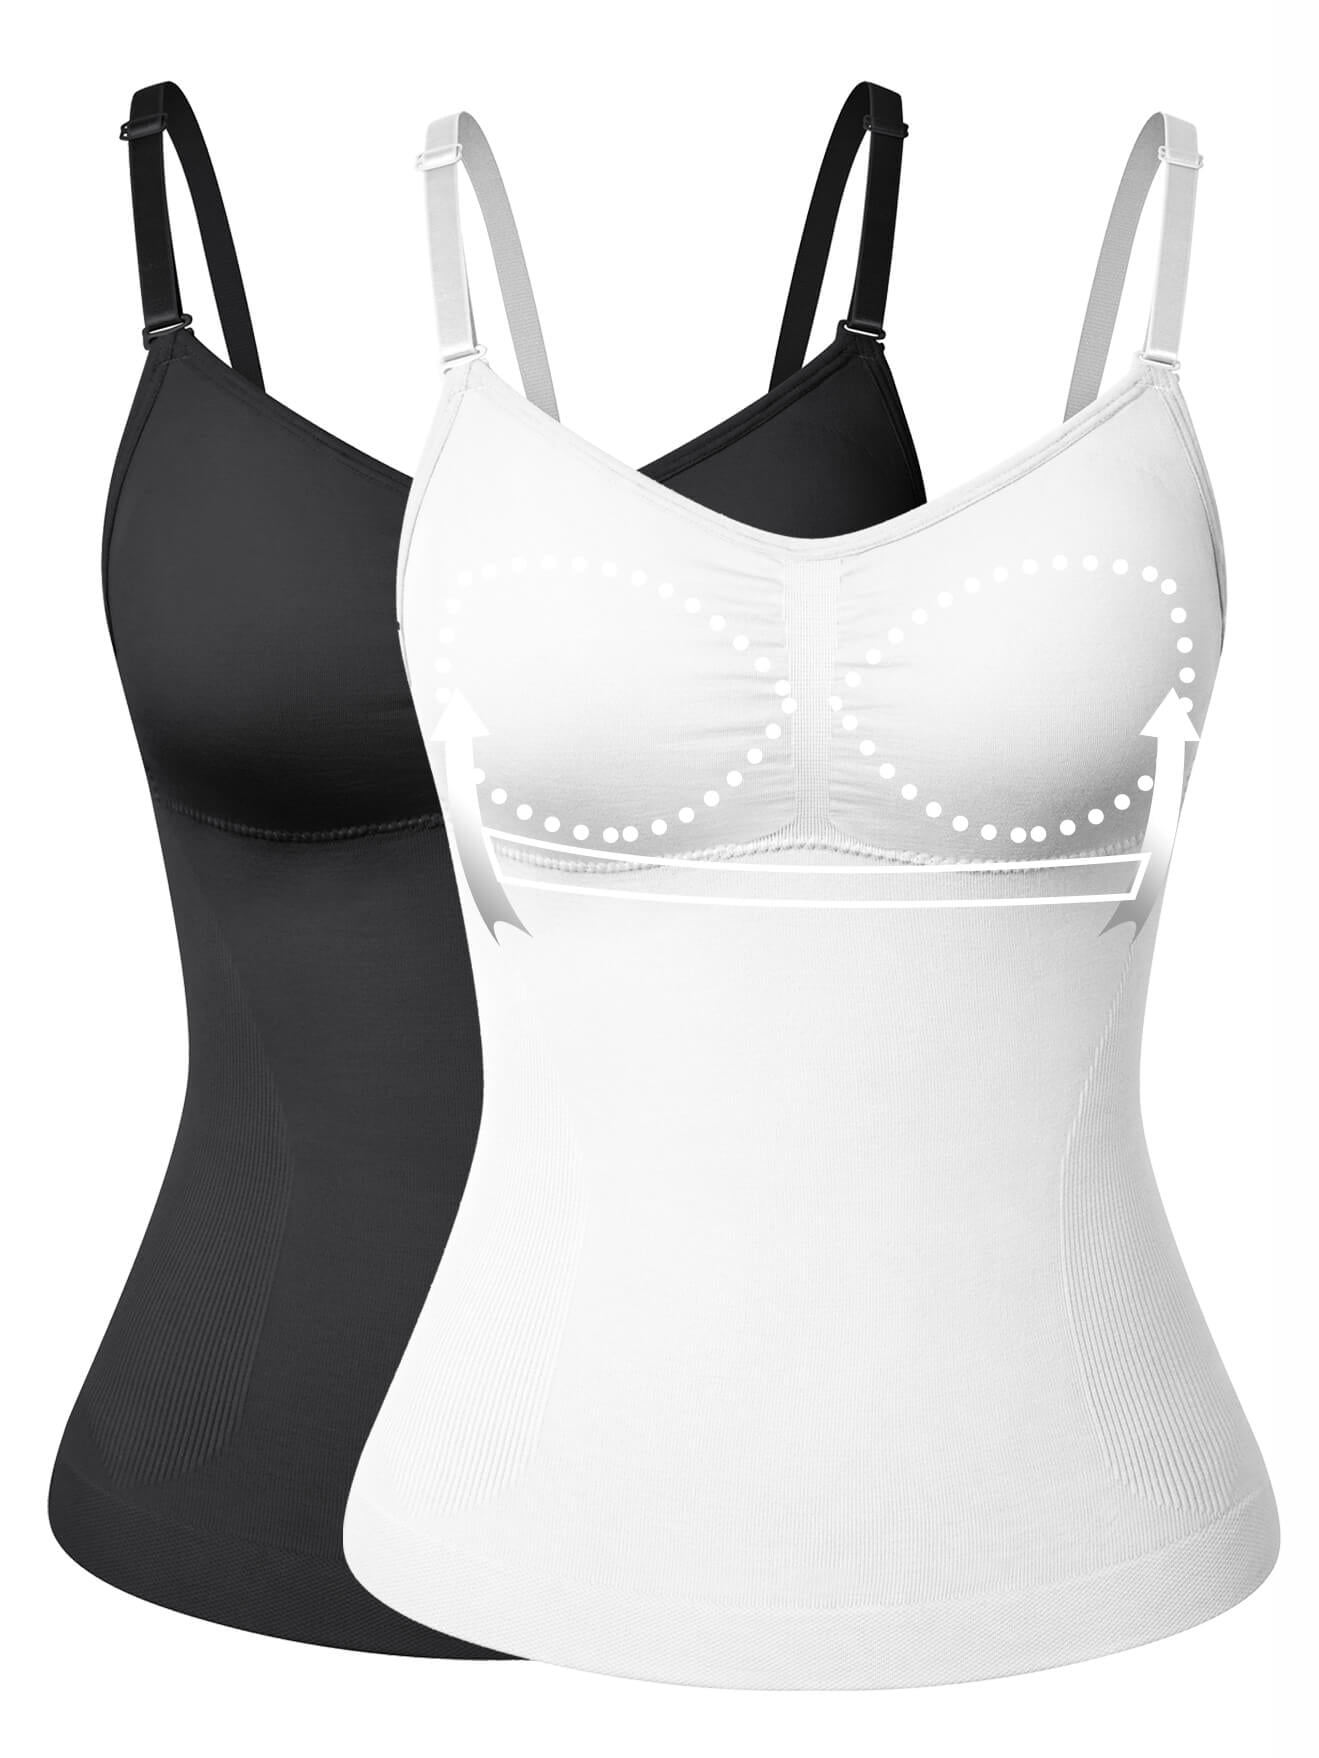 3 Packs Shapewear Camisoles with Built in Padded Bras Tummy